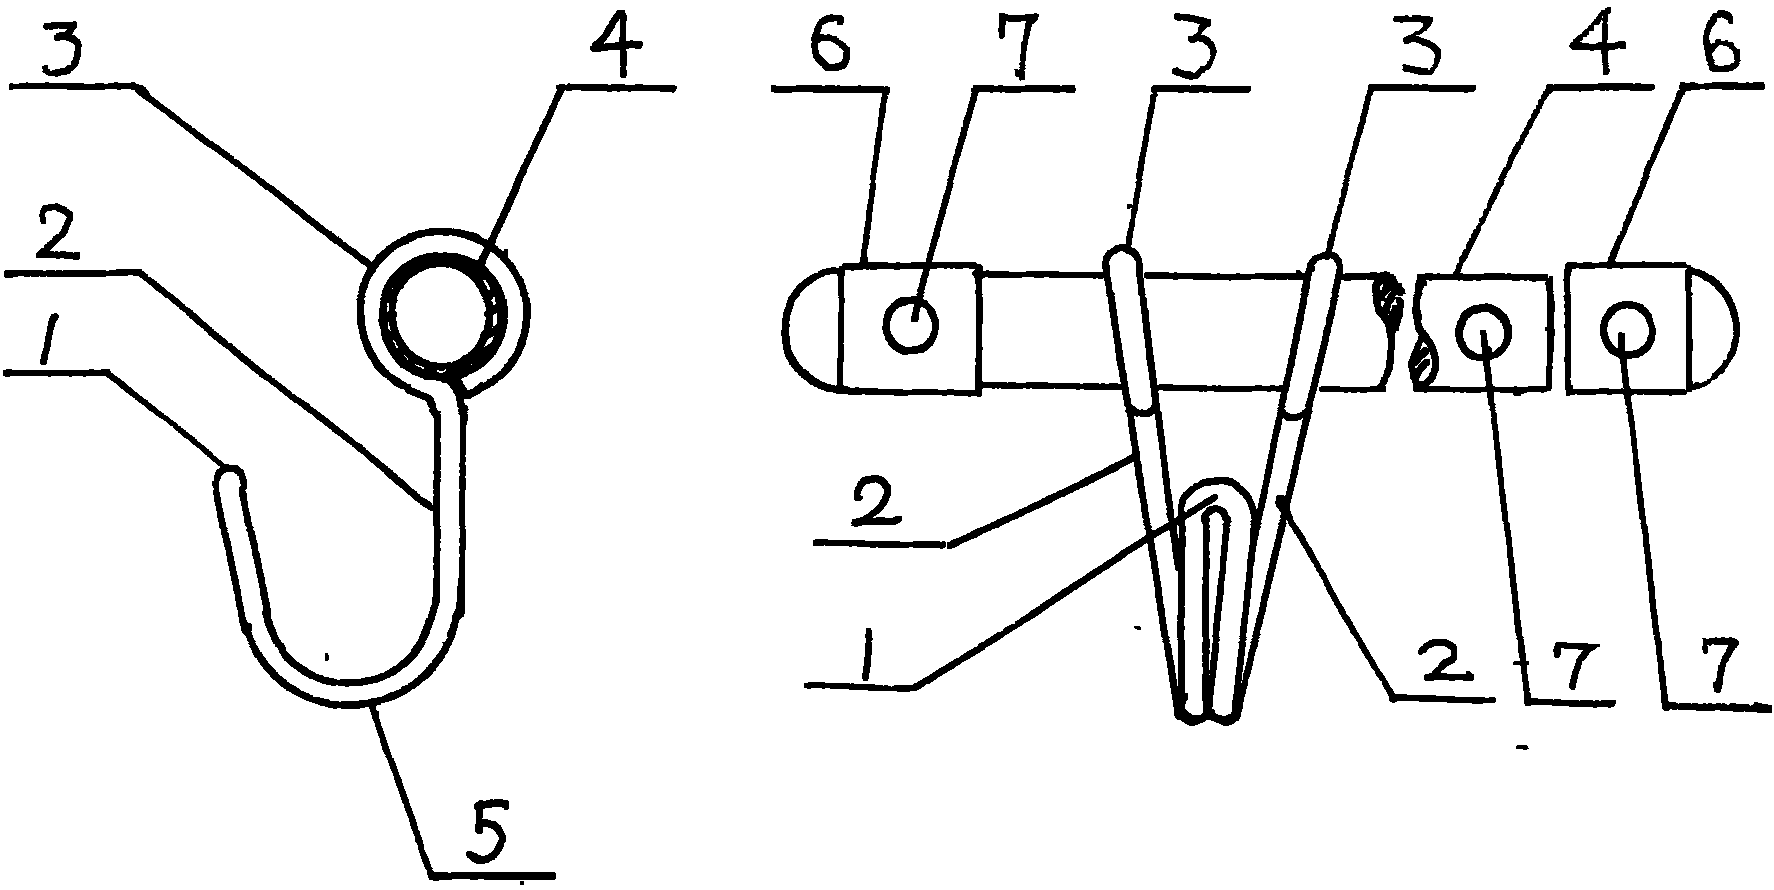 Stable positioning hanger